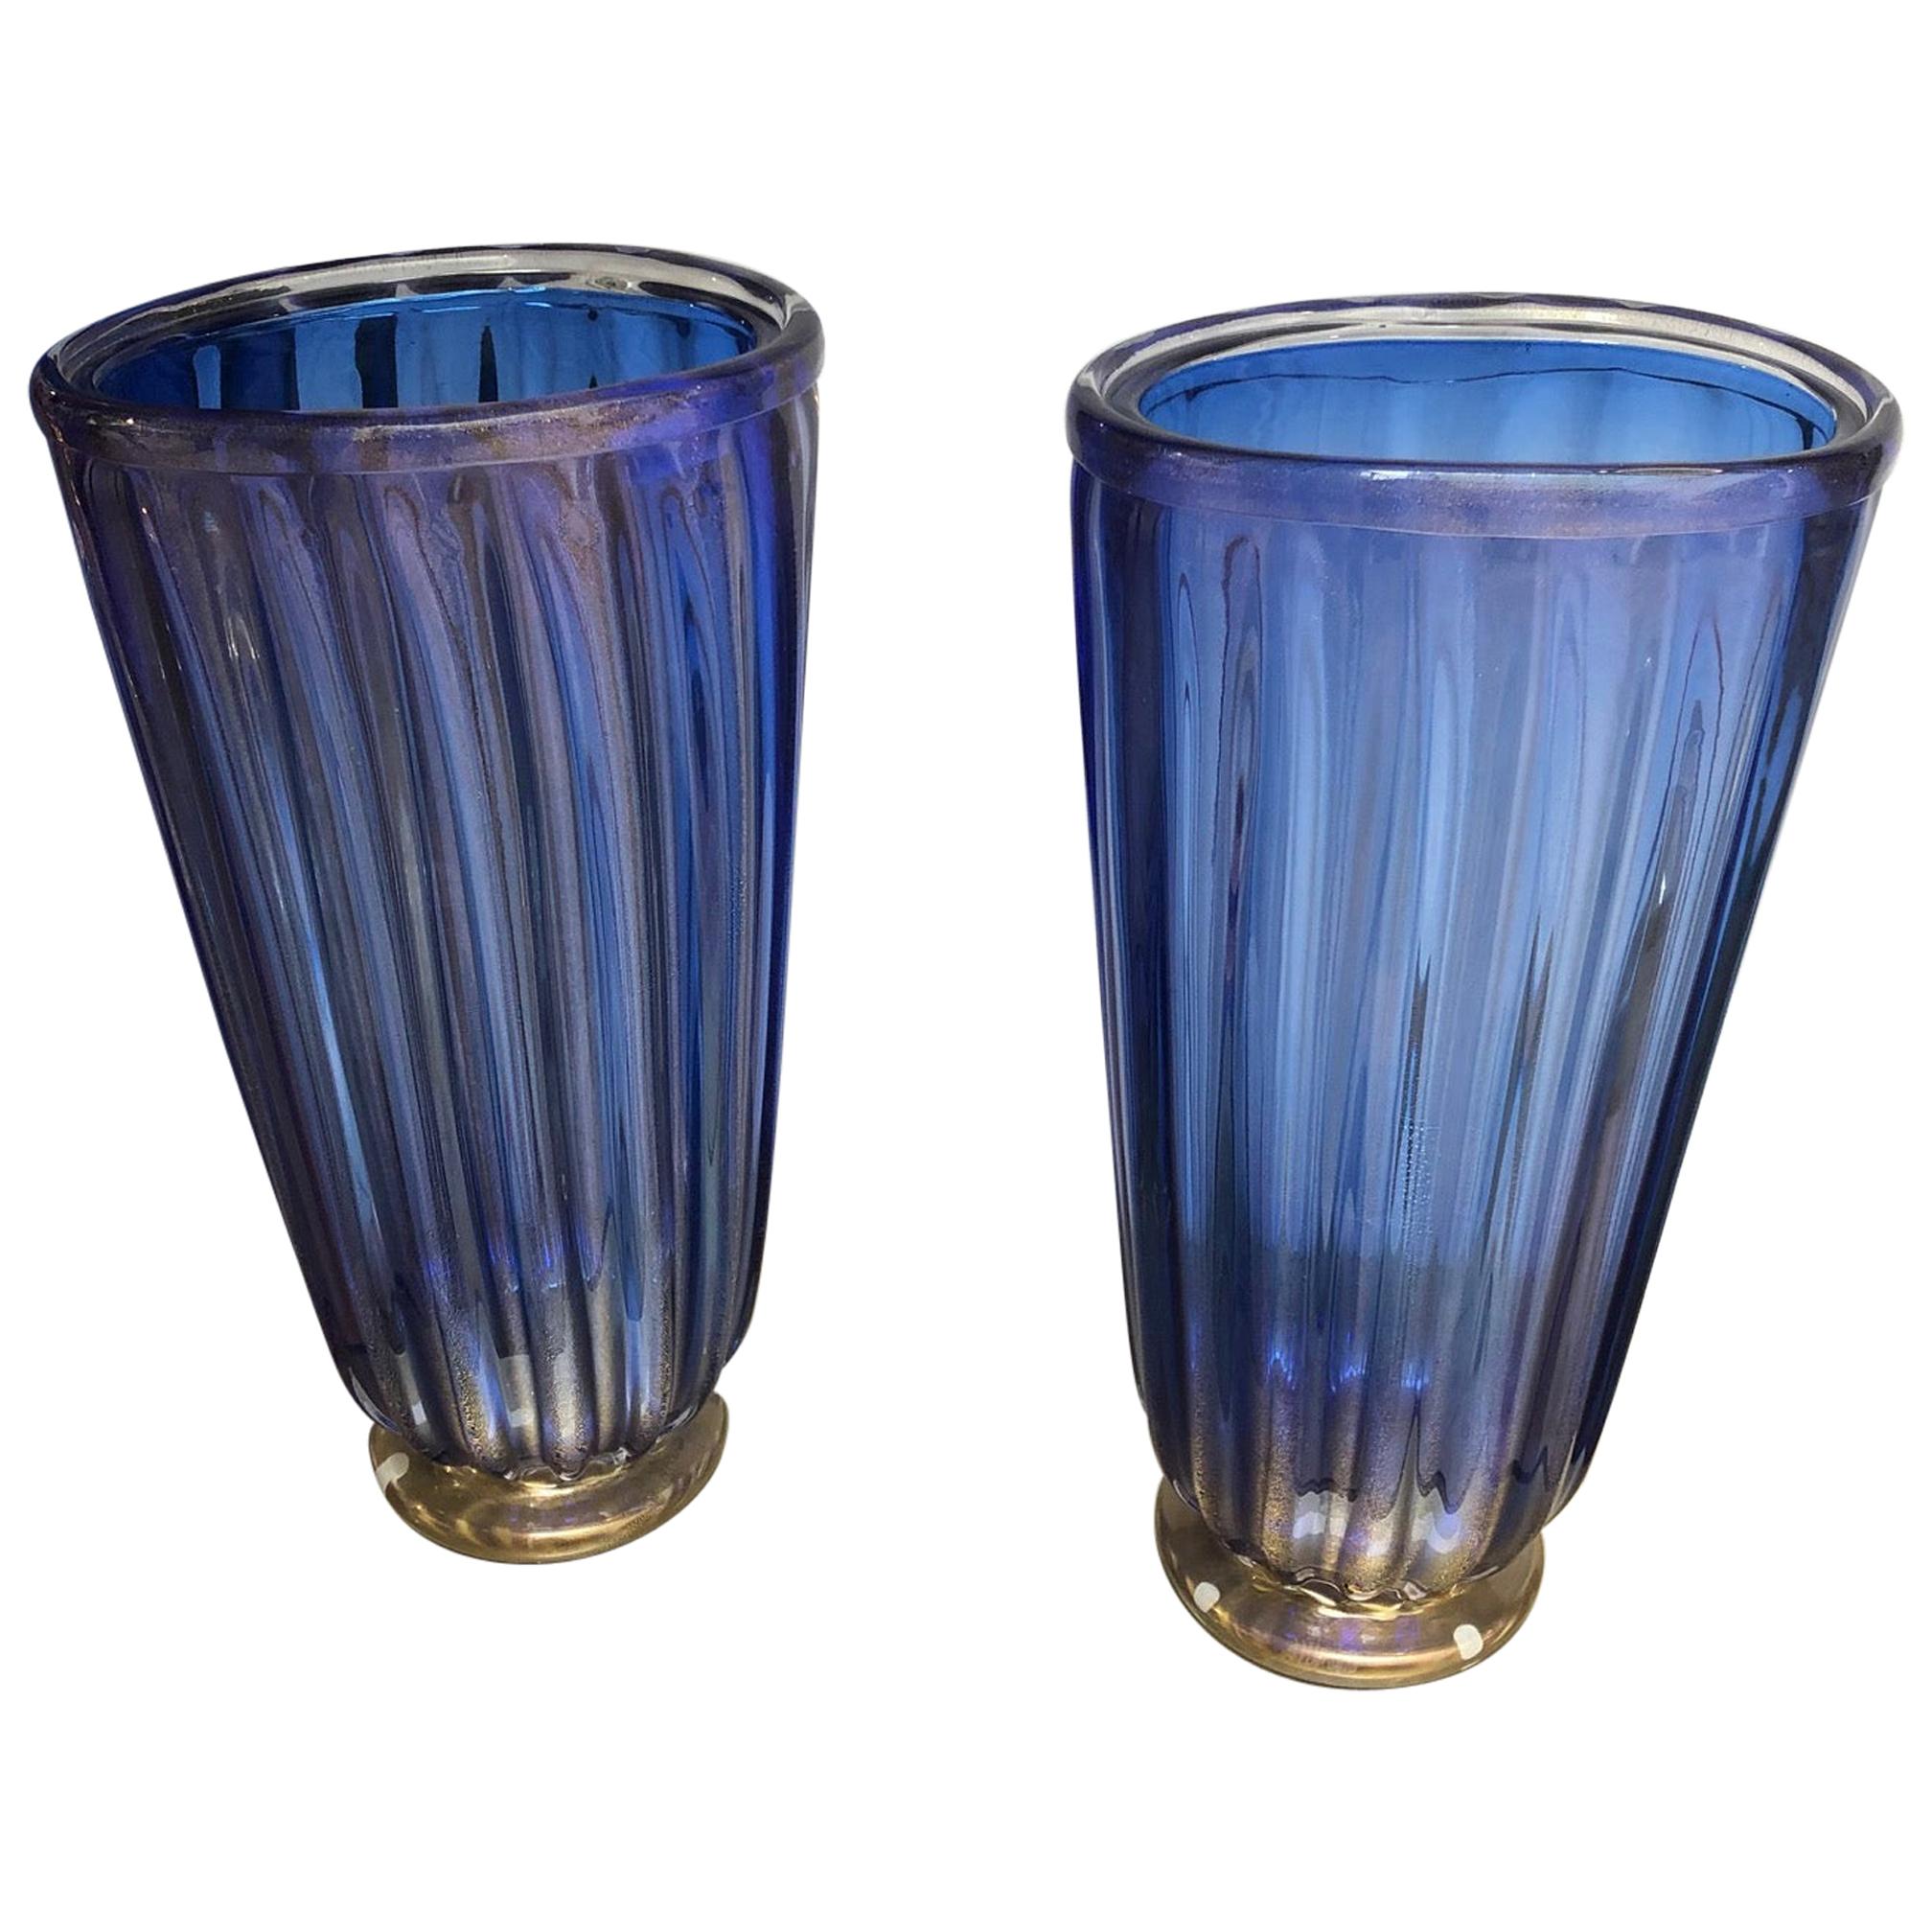 Pair of Vases in Murano Glass Signed “A Dona”